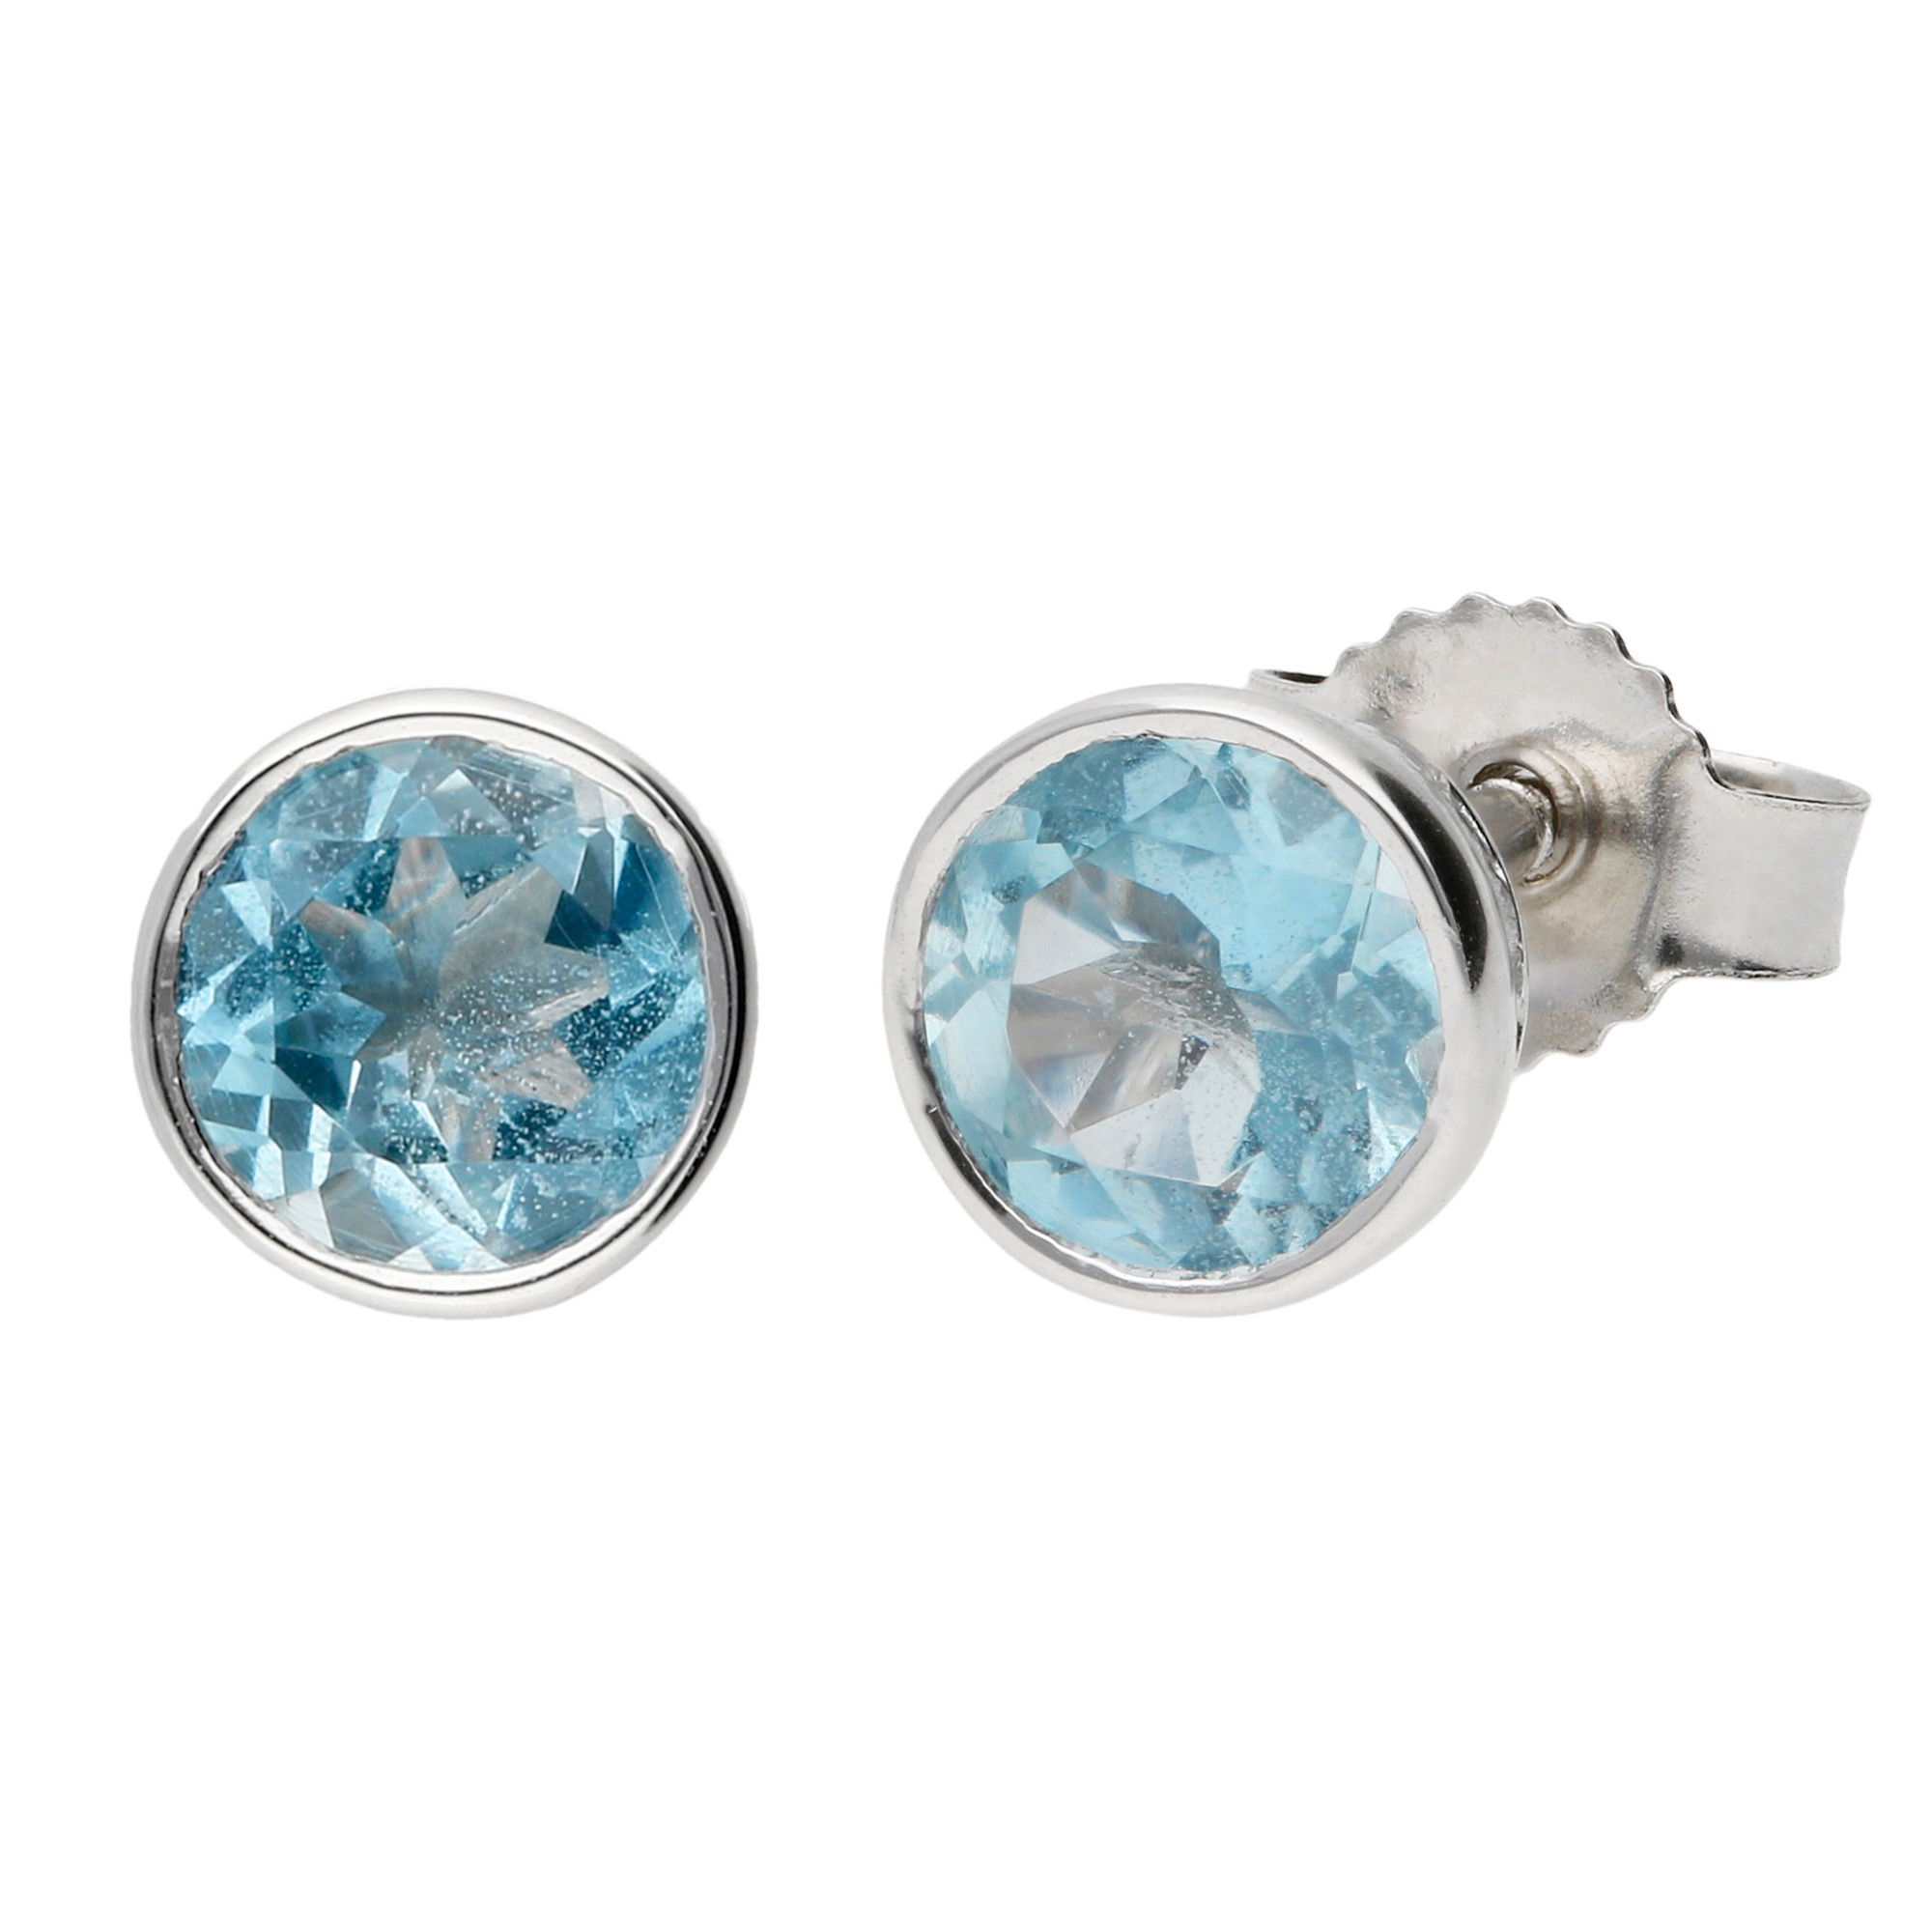 9ct White Gold 5mm Aquamarine Solitaire Round Shape Stud Earrings | Buy ...